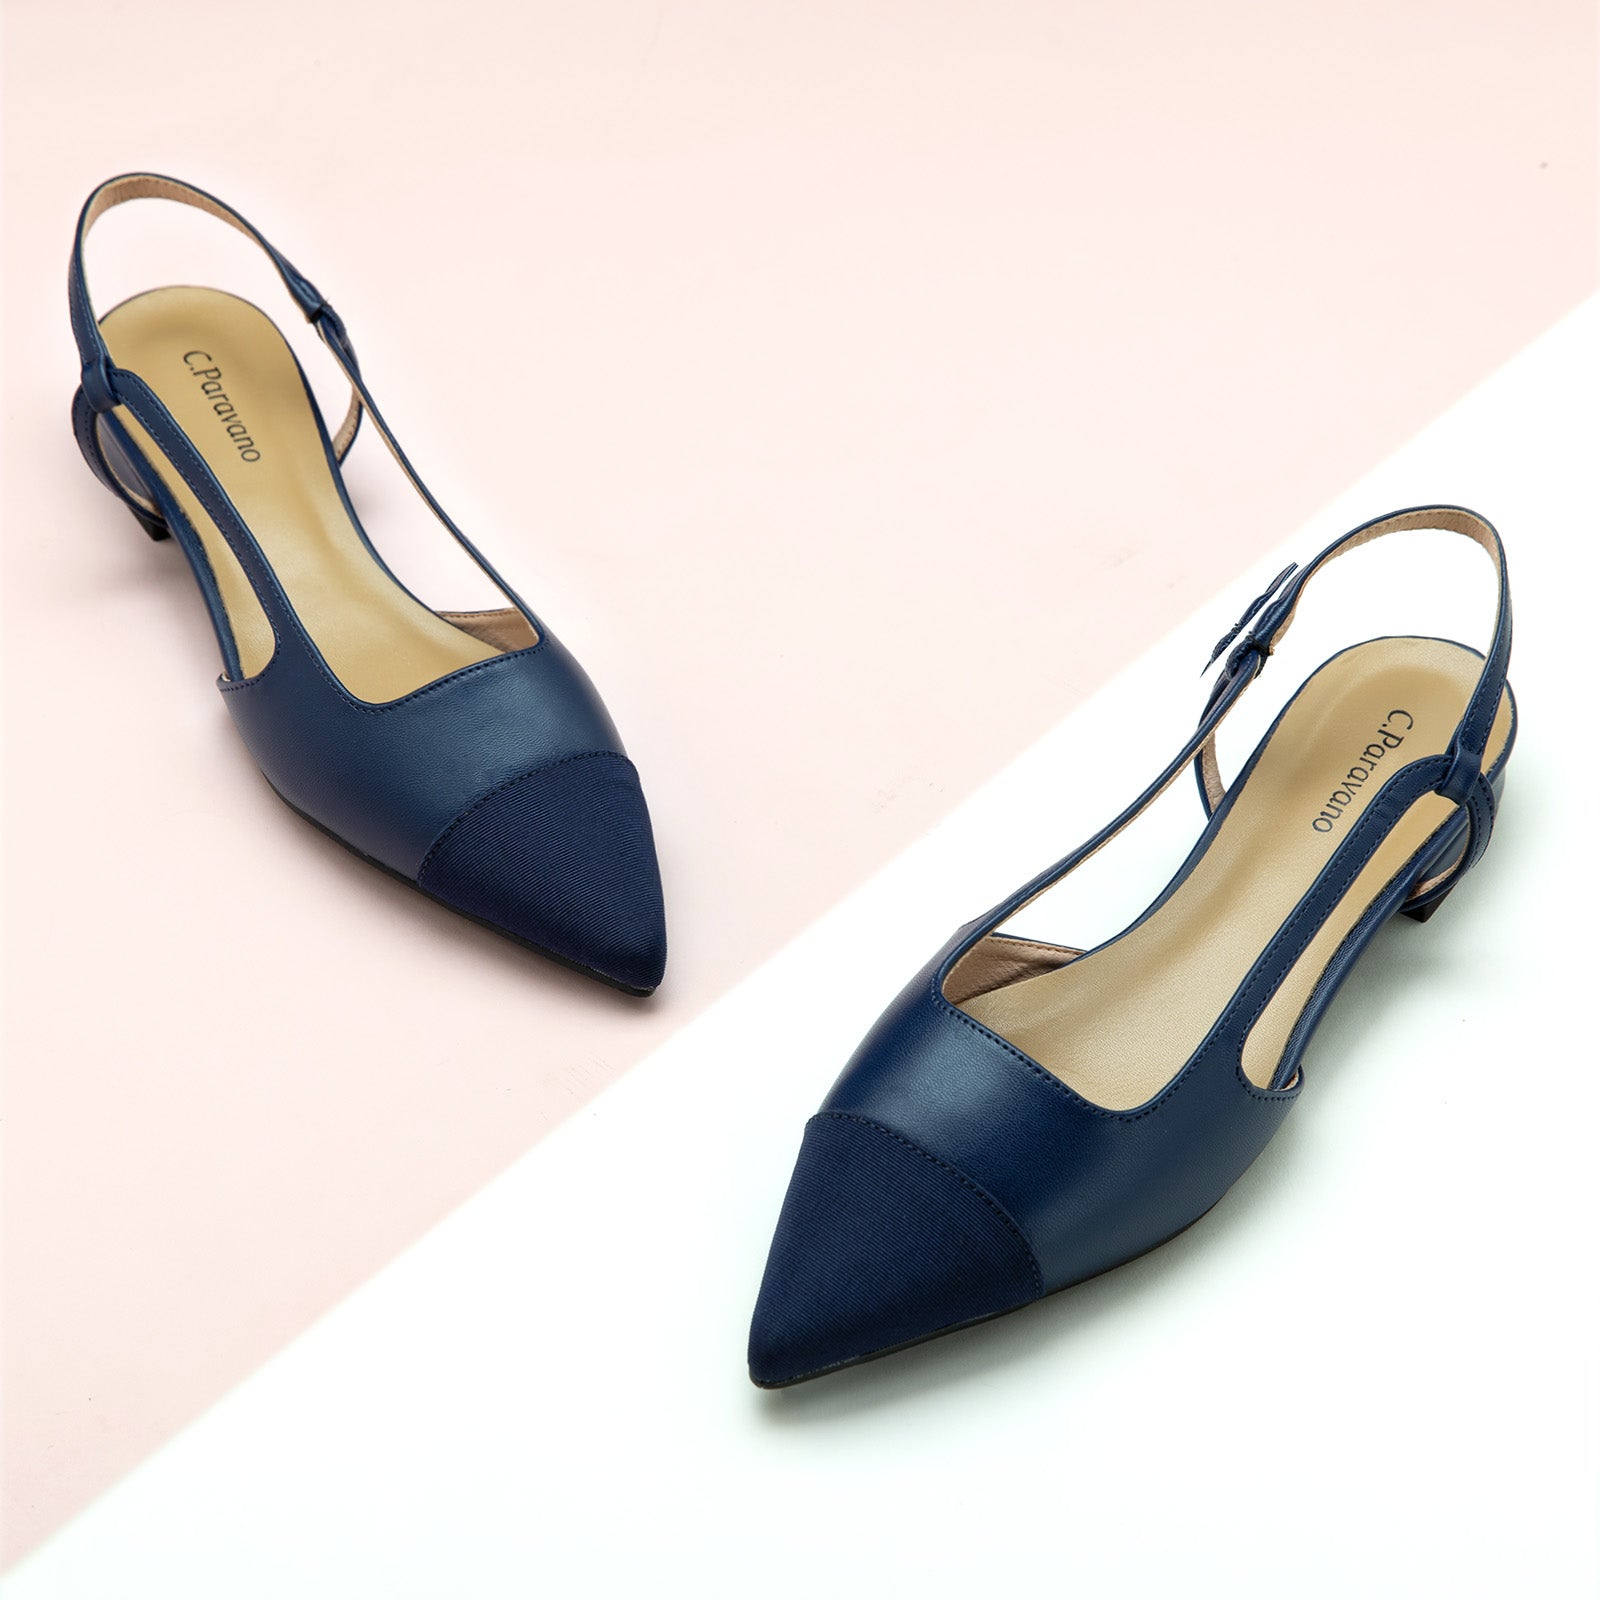 Navy Slingback Flats with a pointed toe, perfect for a confident and fashionable look in any urban setting.